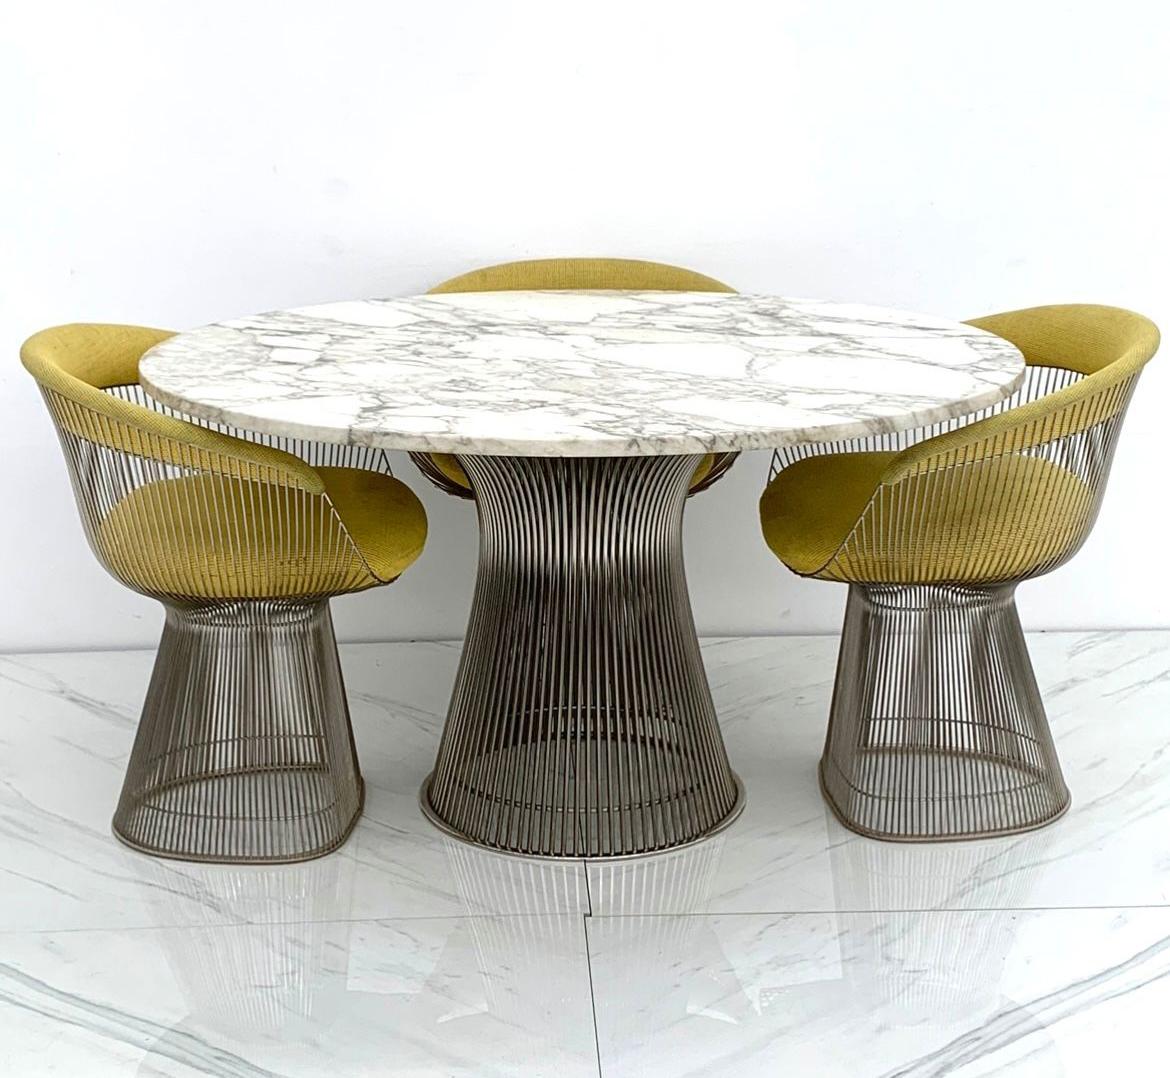 A truly stunning dining table, Warren Platner for Knoll polished nickel and steel base dining table with a stunning veined Italian Arabescato marble top. This original 1960's dining table came from a Scottsdale estate with 1 owner where it sat until